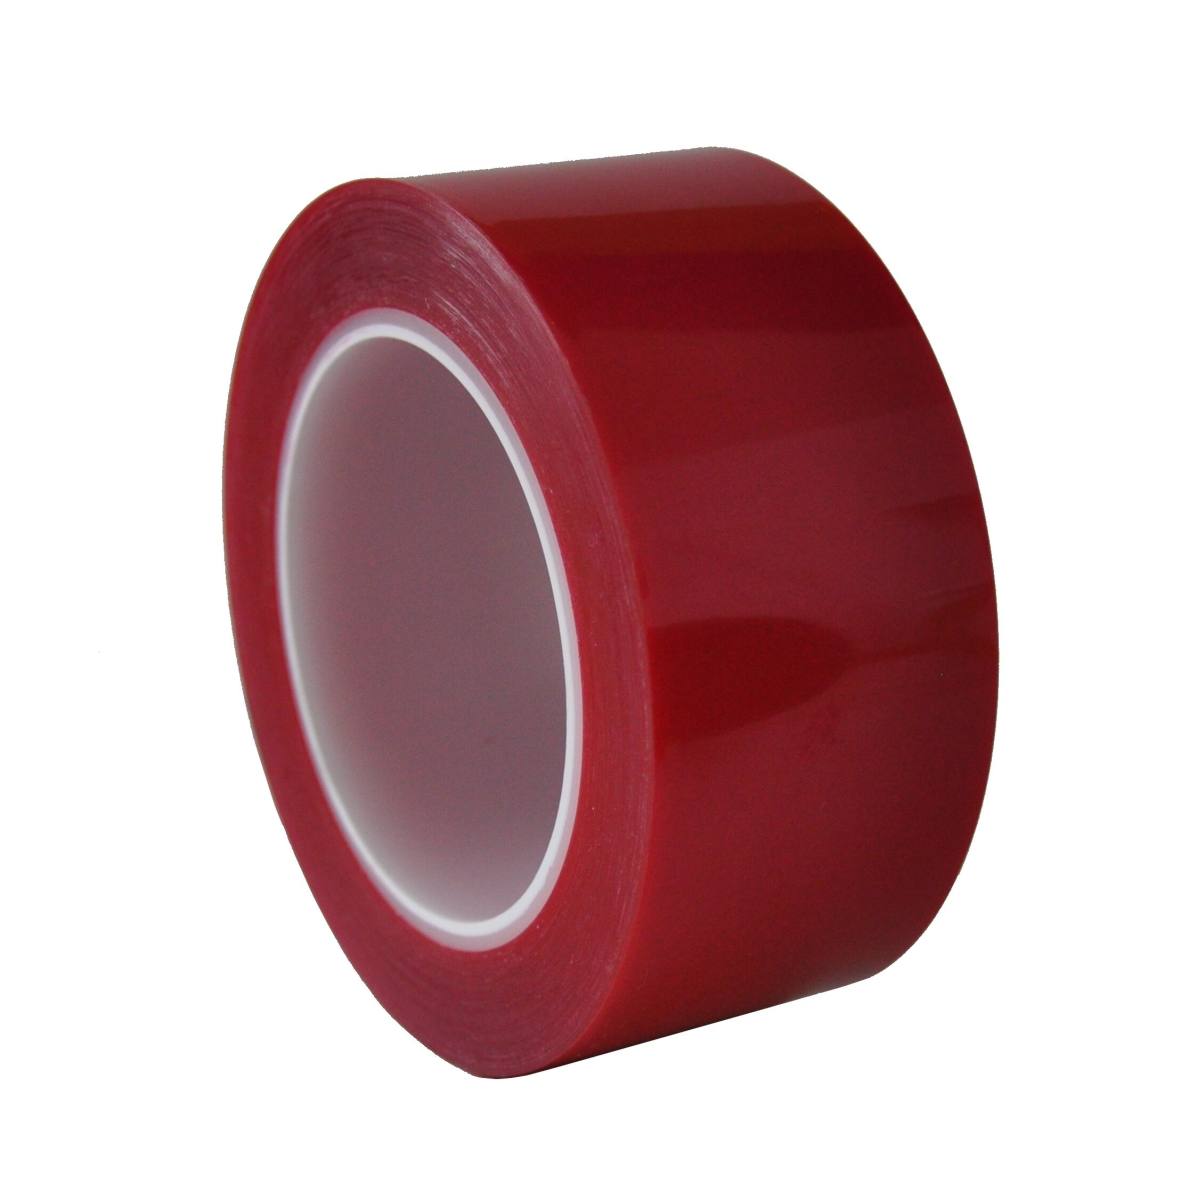 S-K-S 208R Polyester adhesive tape, 200mmx66m, red